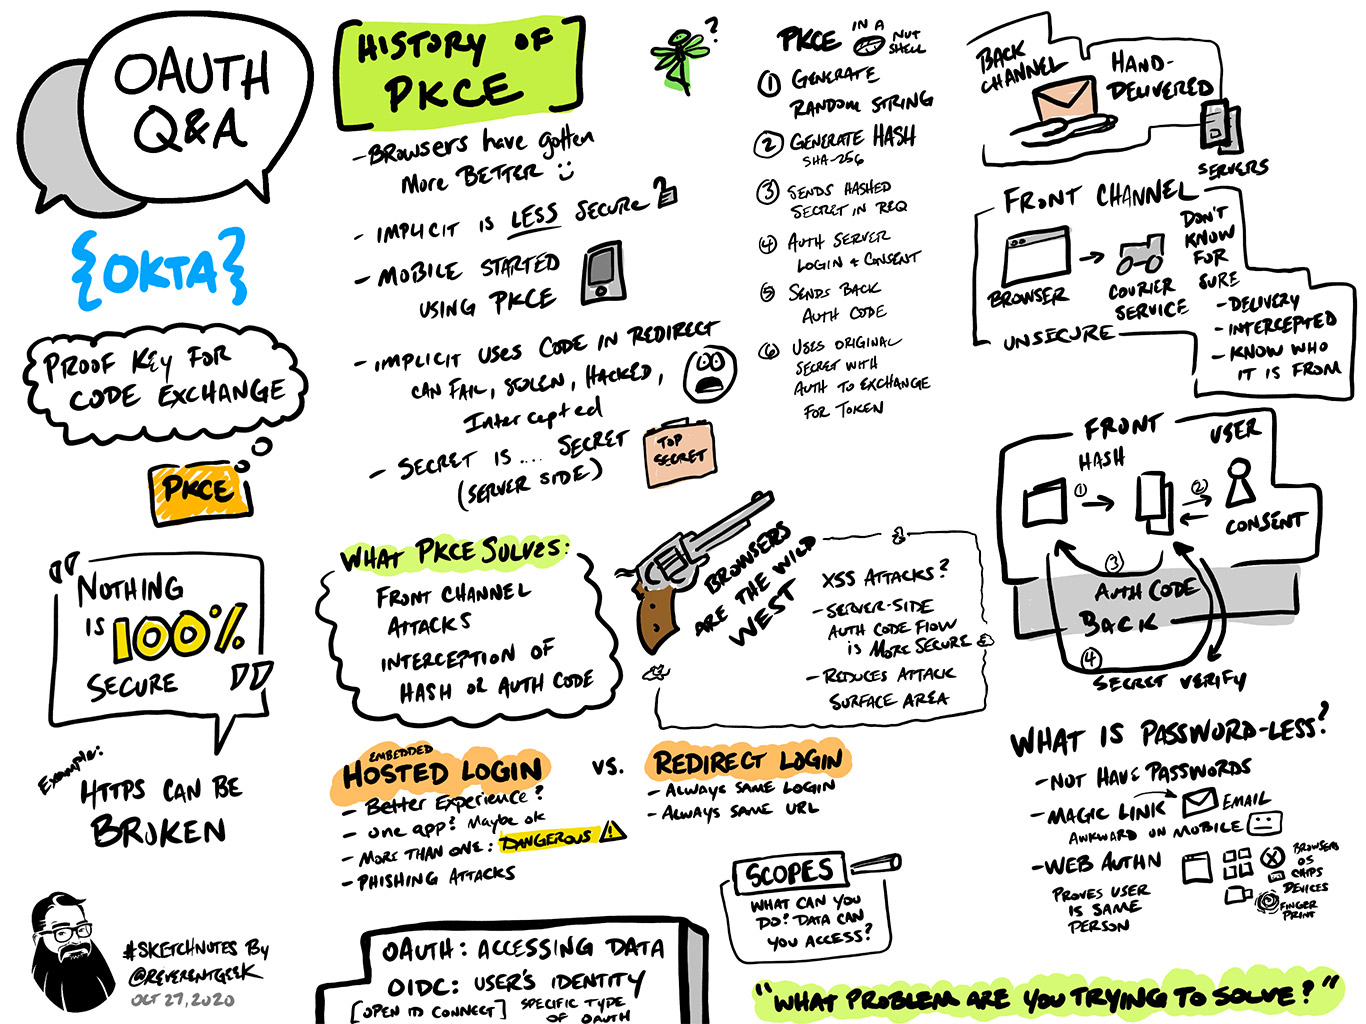 OAuth Q&A Sketch Notes